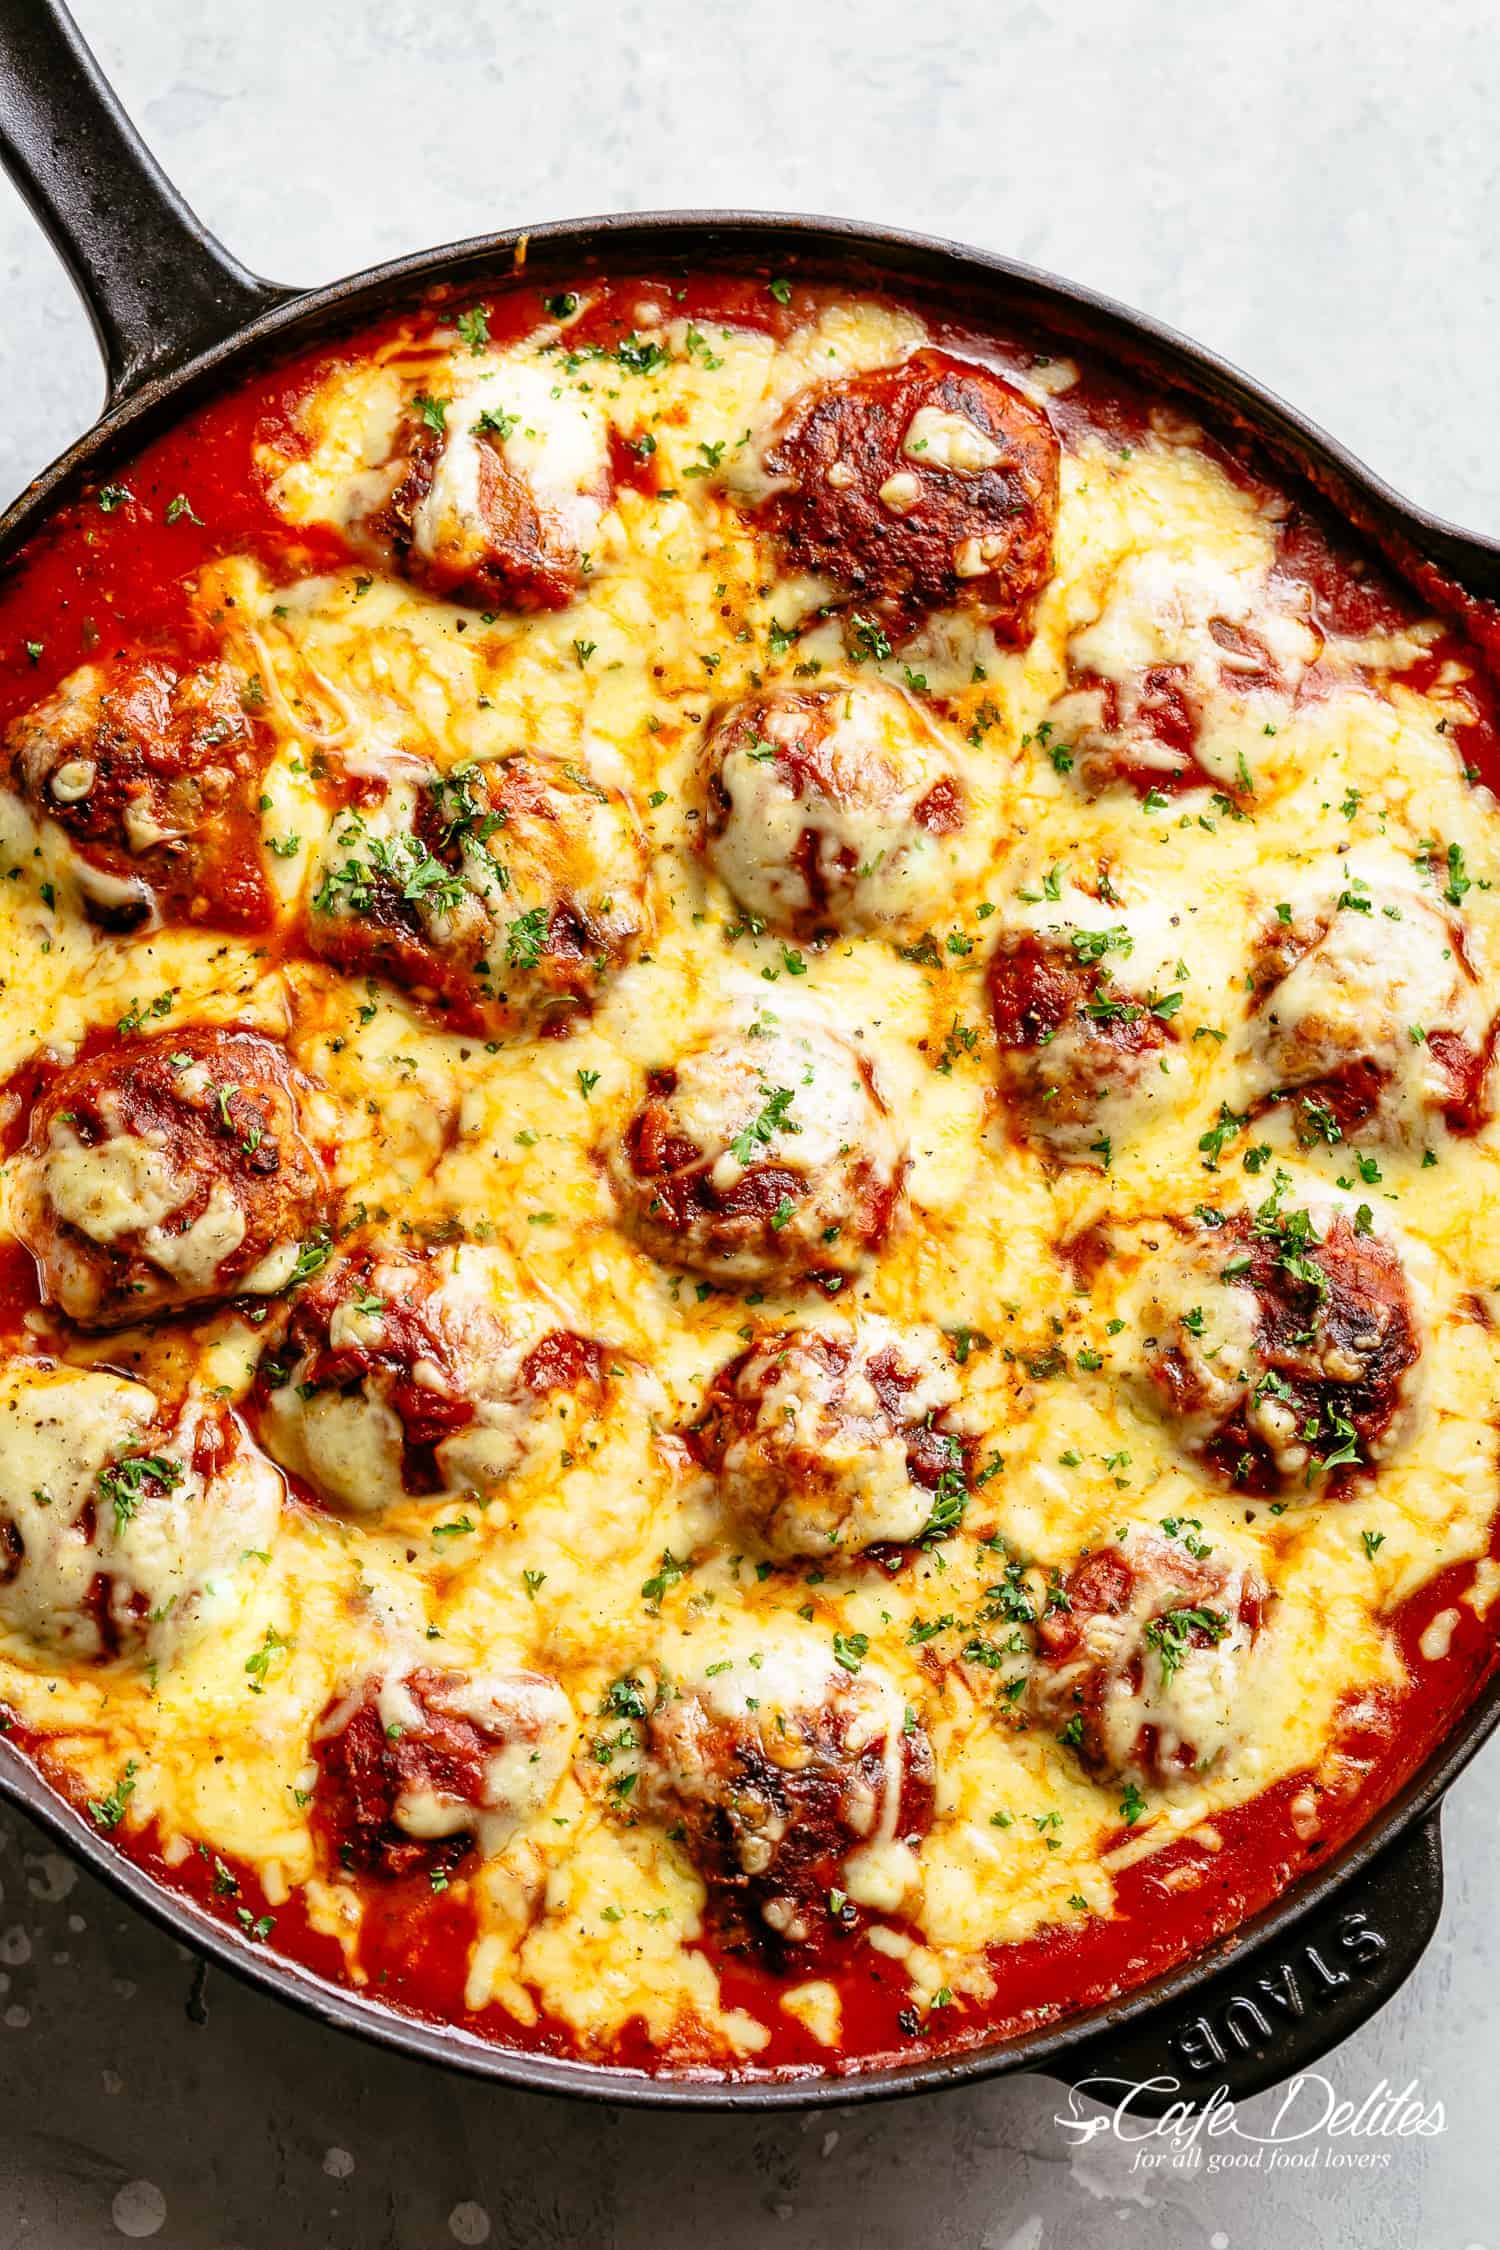 Cheesy Meatballs are soft, juicy and tender, simmered in a rustic homemade tomato sauce. Topped with melted mozzarella cheese and serve over spaghetti for a delicious dinner!